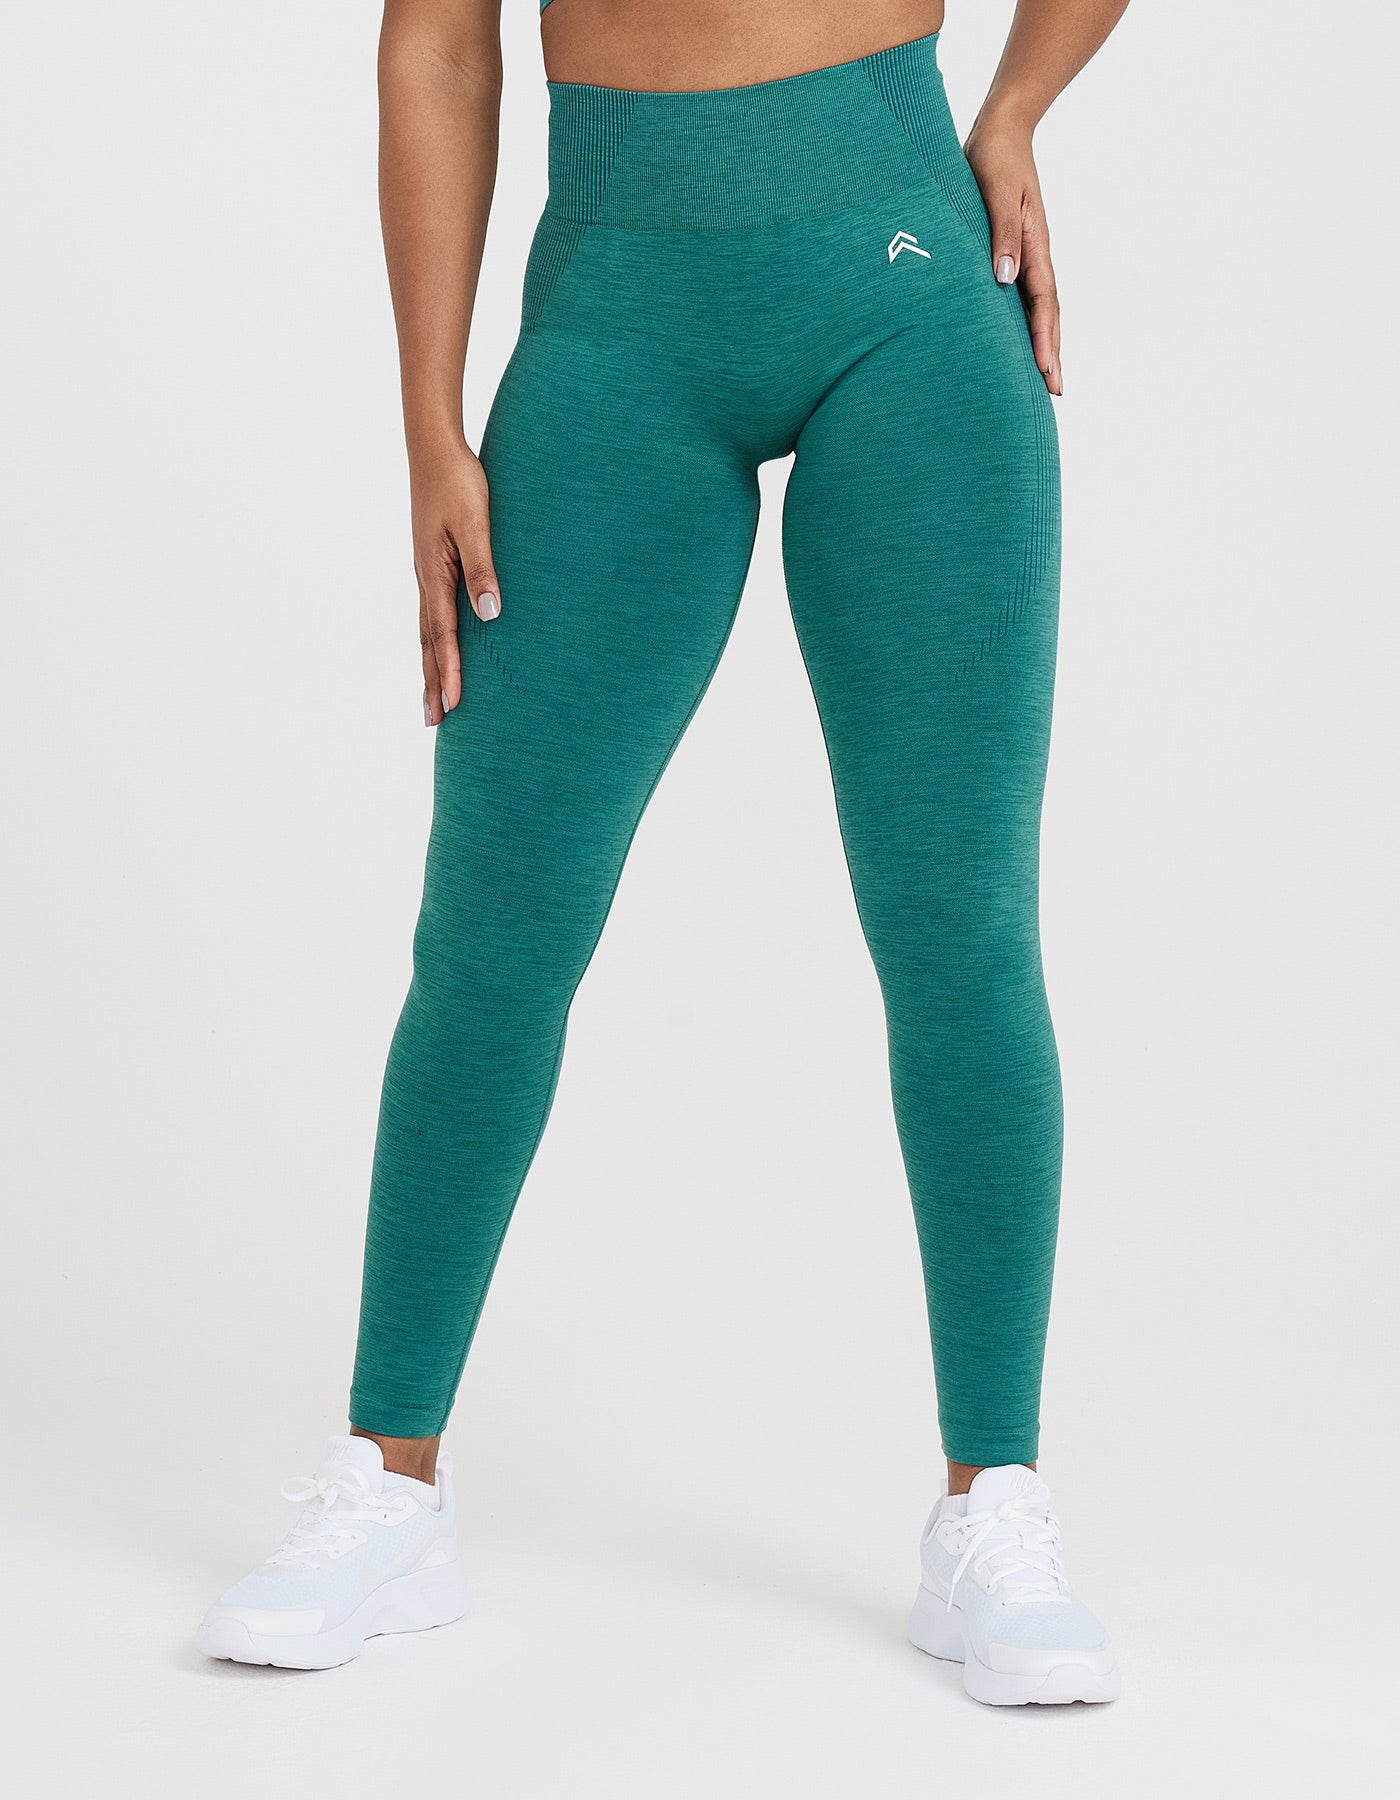 THE WATER GREEN SEAMLESS LEGGINGS – SPRY